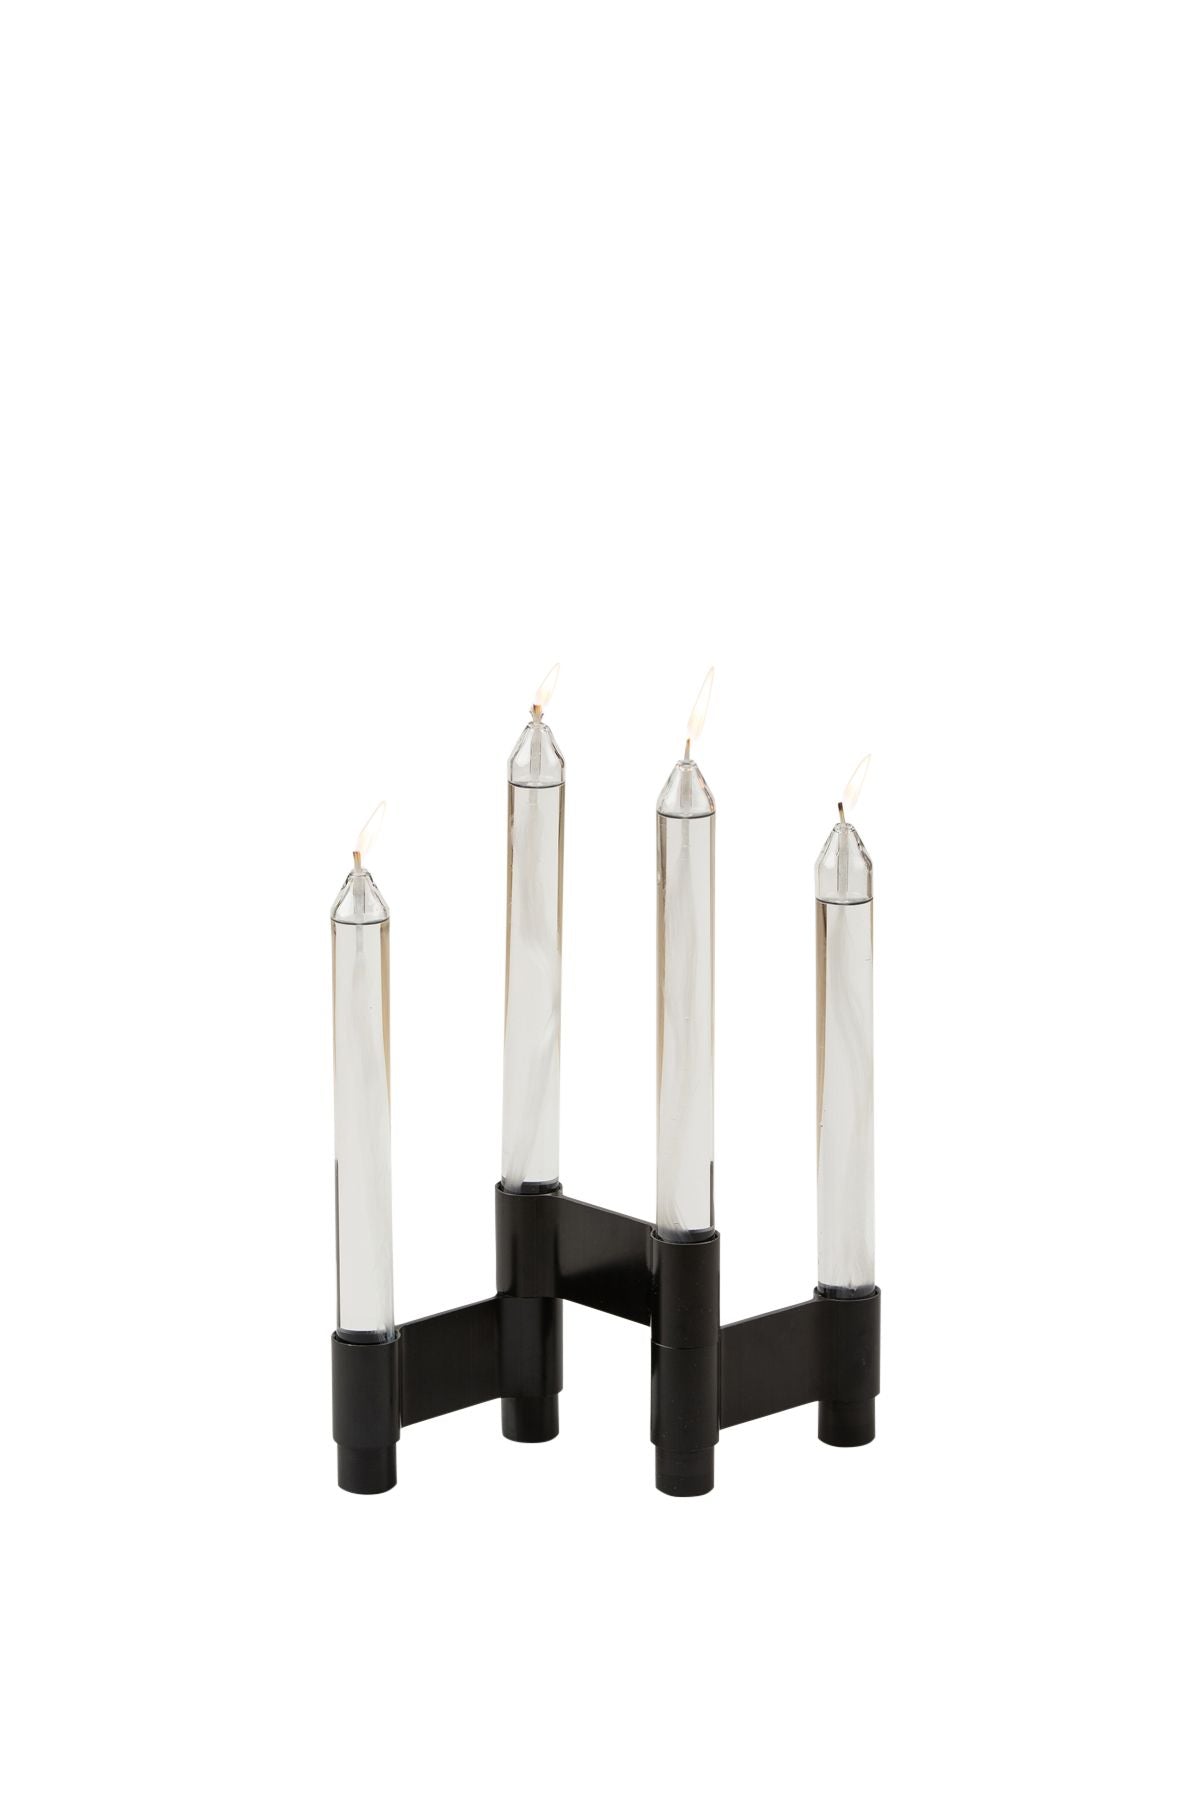 Studio About Link Candle Holder, Black Anodized